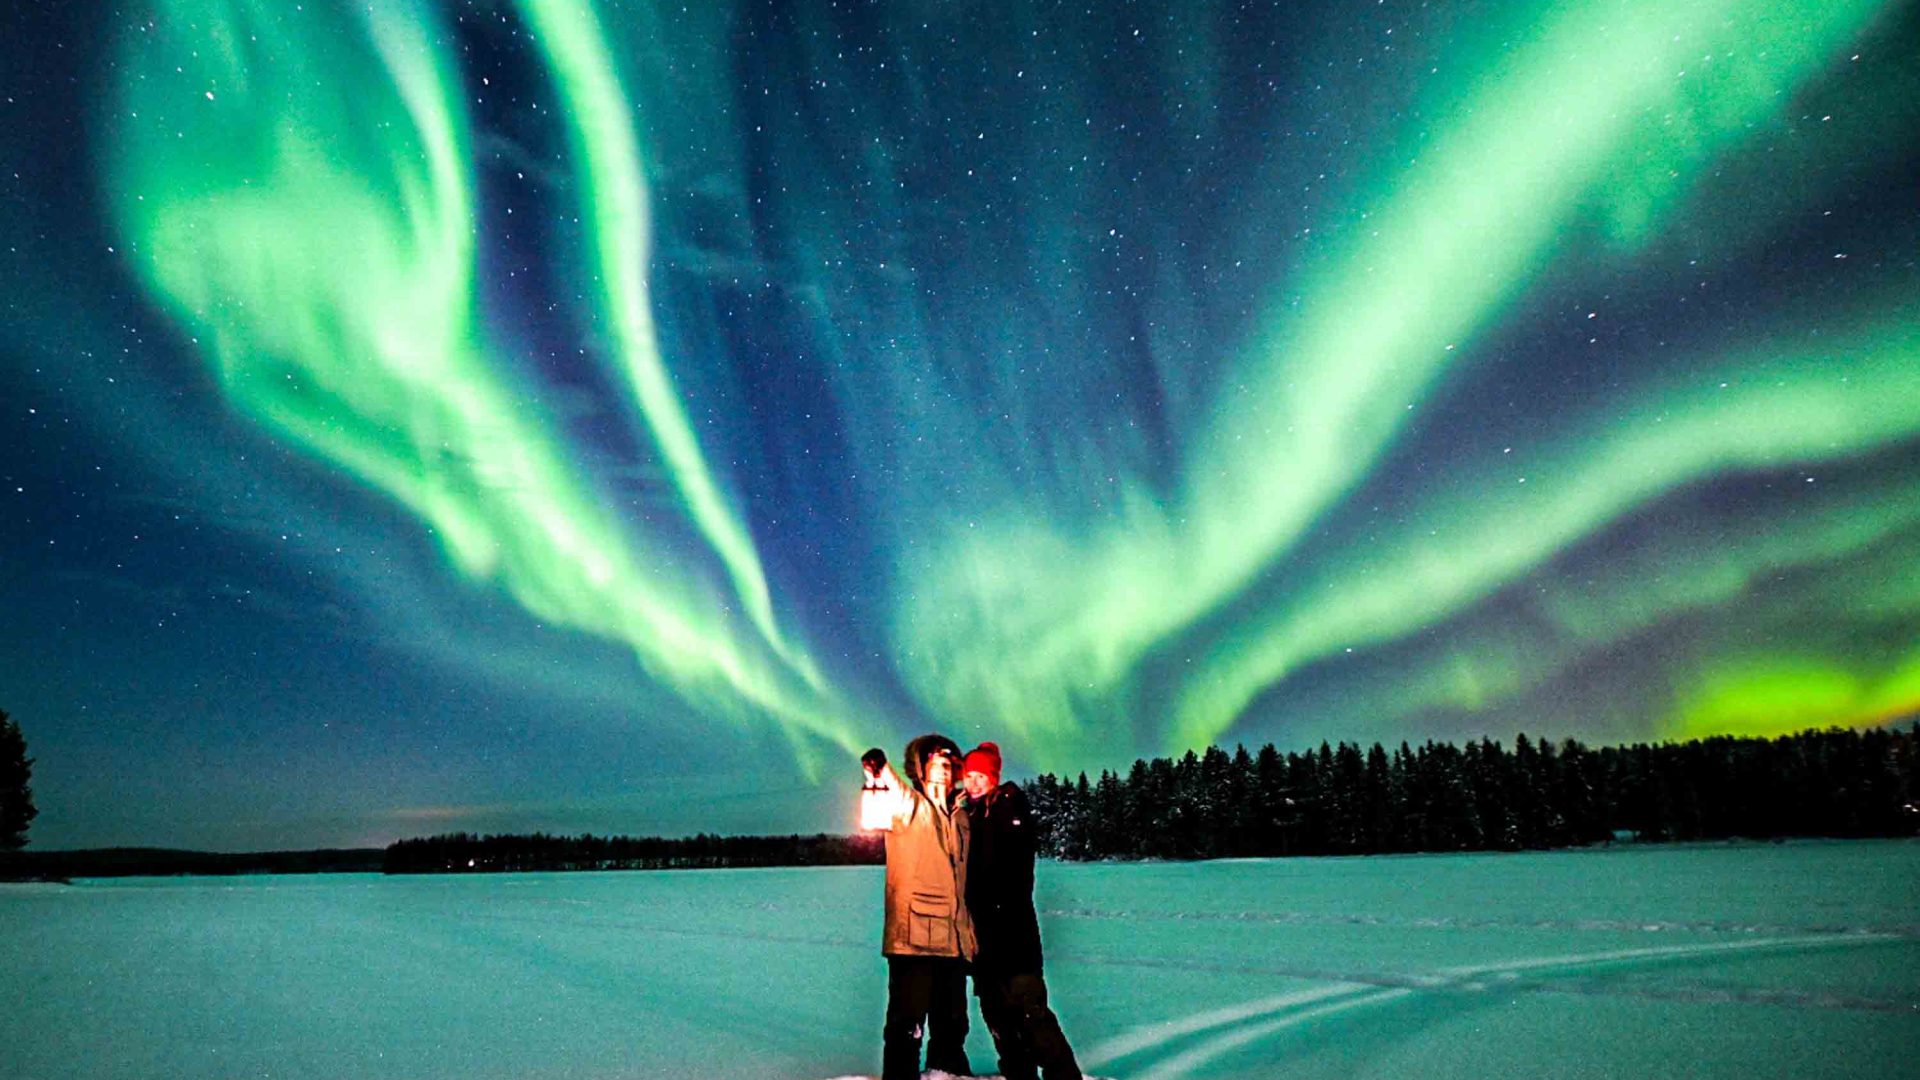 A couple stand in the Arctic, under green Aurora in the sky.